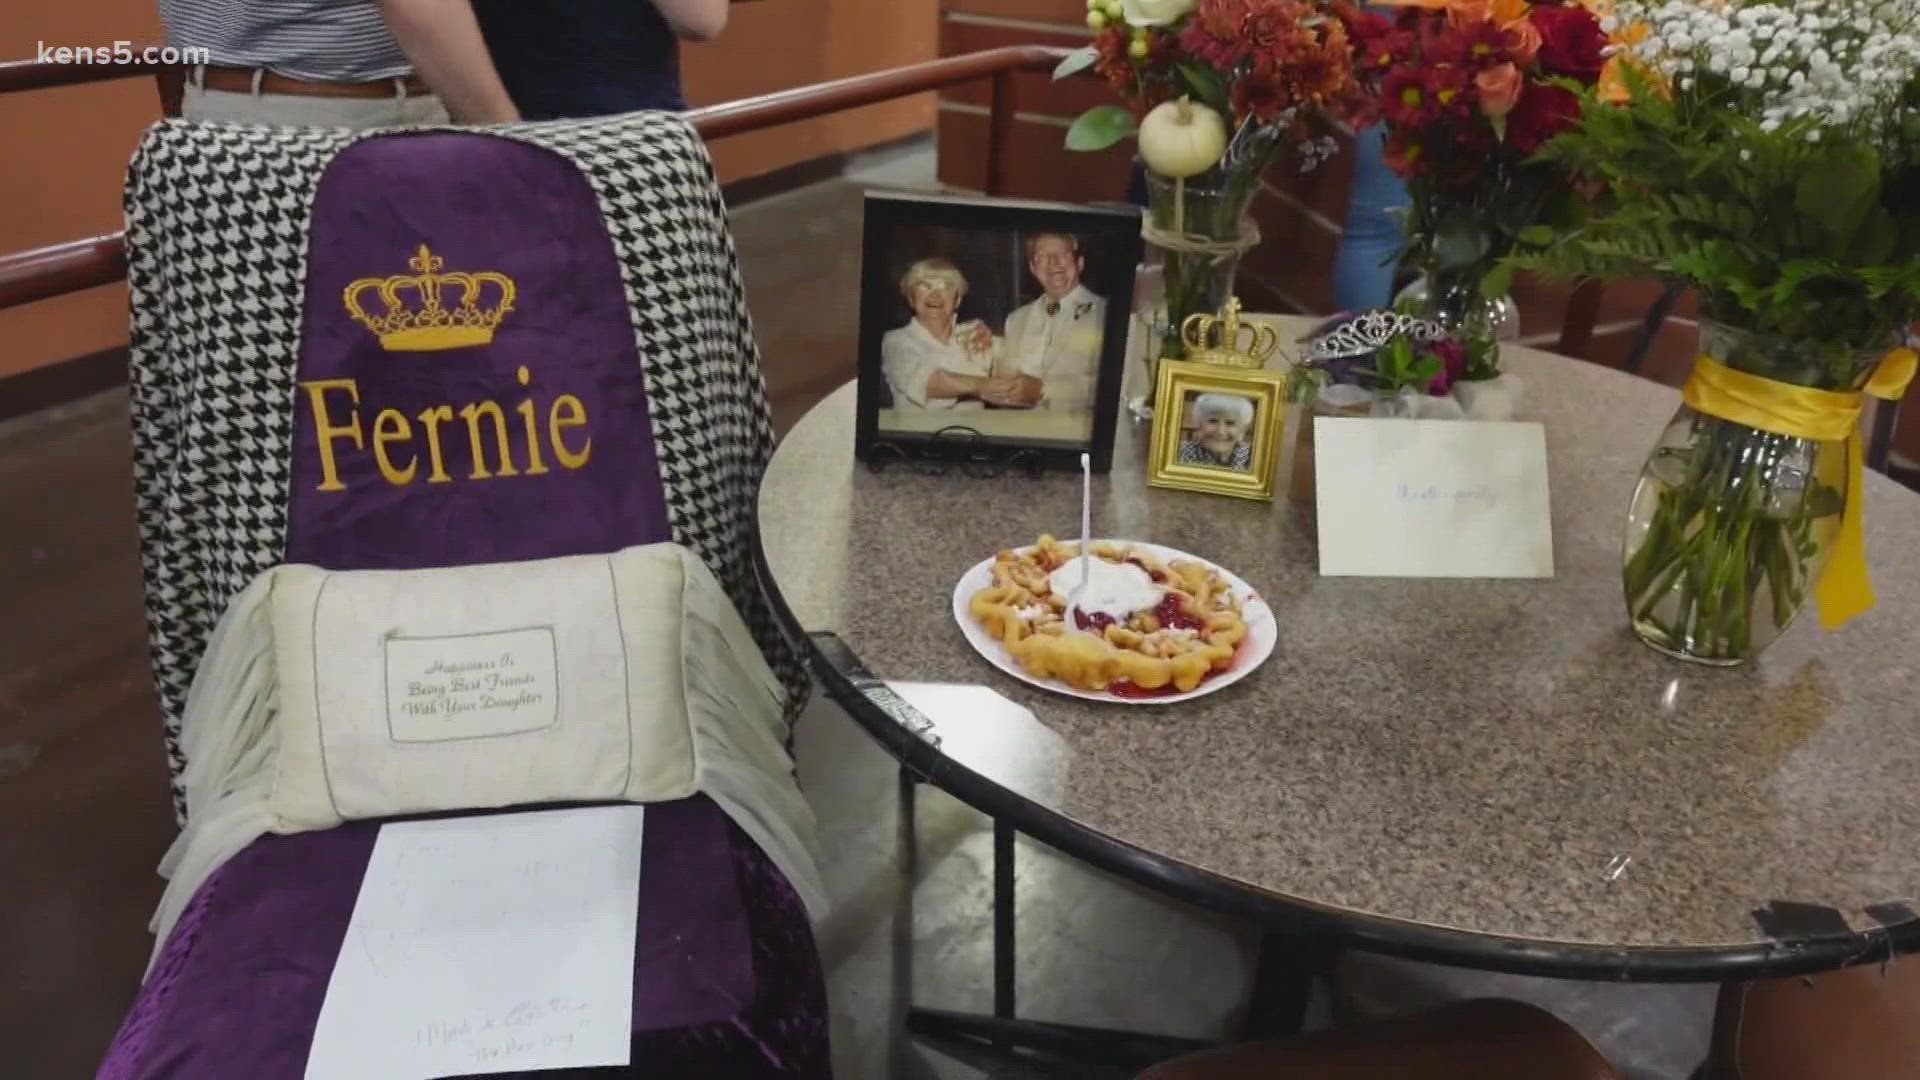 Fernie's Funnel Cakes touches many taste buds but the woman behind it touched many hearts. Unfortunately, she recently died. Here's how she's being honored.